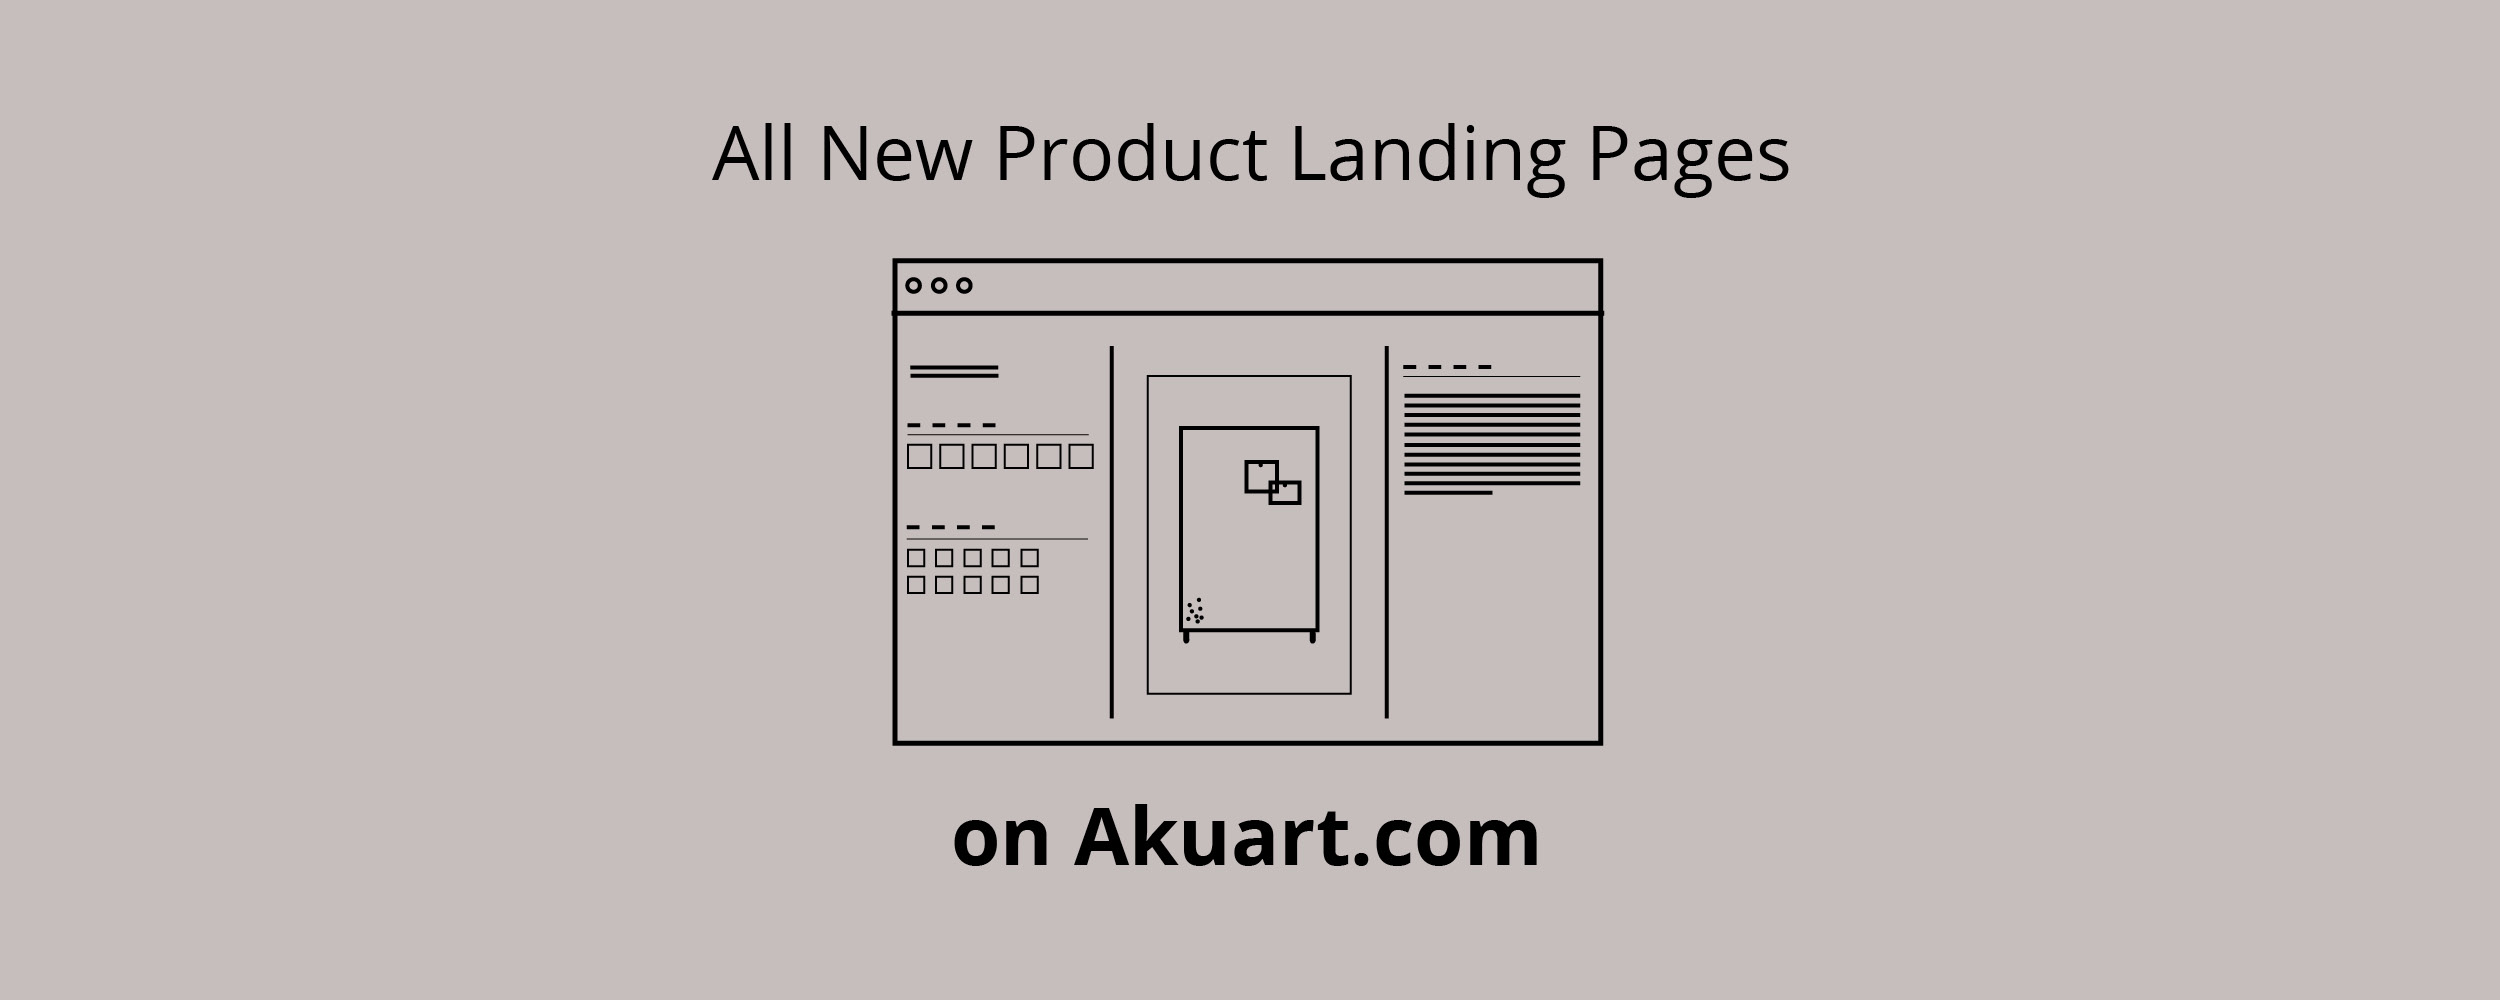 All new product landing pages on akuart.com